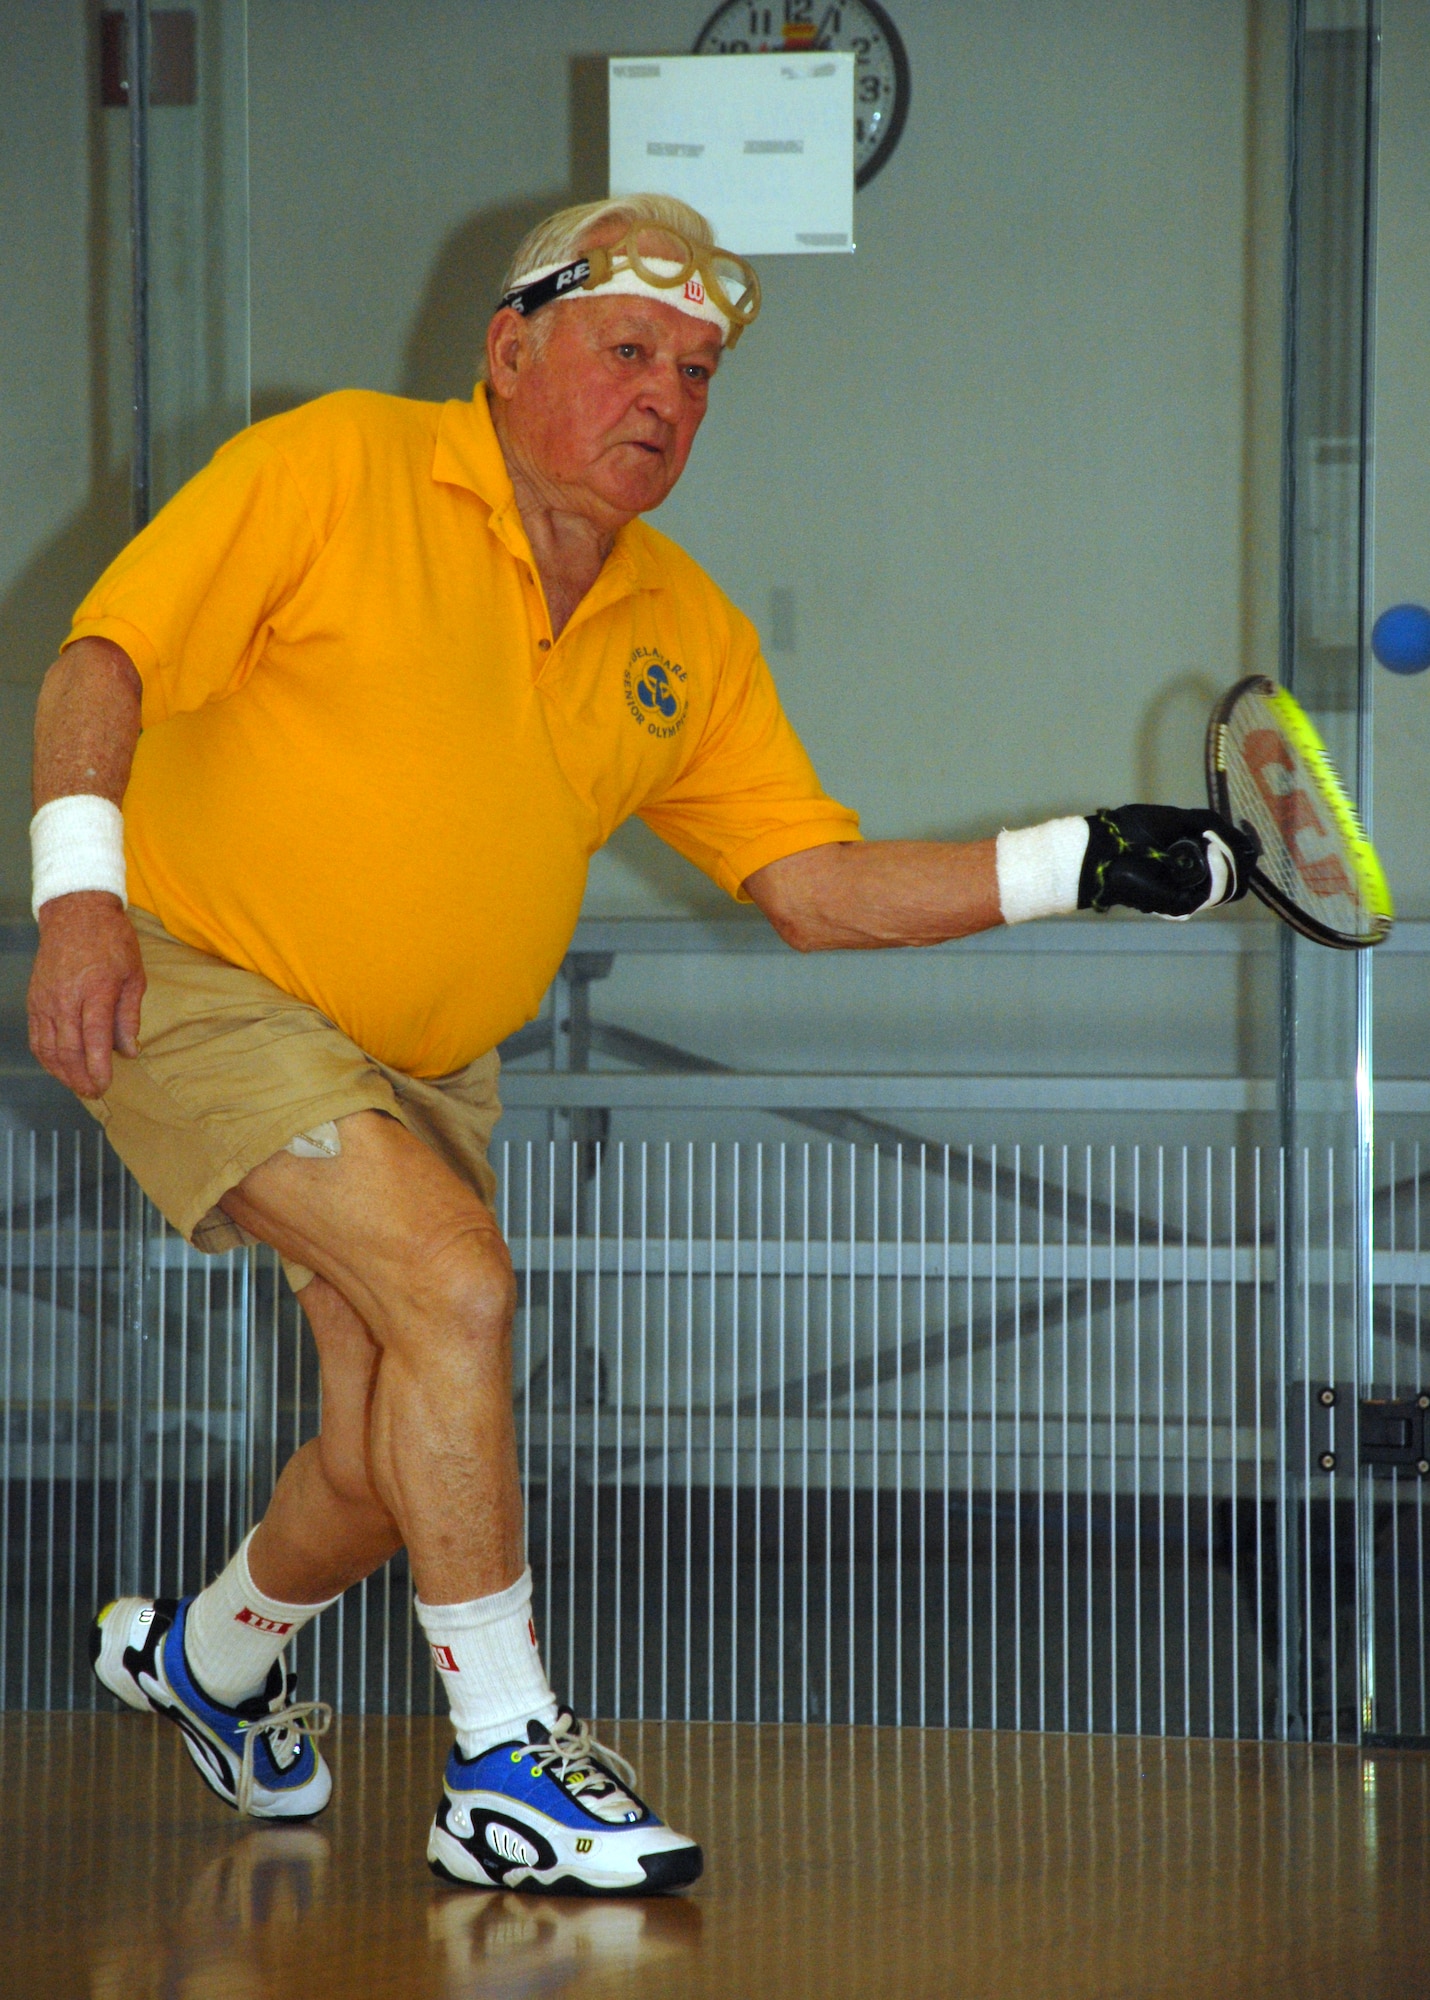 Bill Dawkins, a 79-year-old former Marine Corps private first class, sharpens his racquetball skills at the Dover Air Force Base Fitness Center. Mr. Dawkins is preparing for the National Senior Games 2009 – Senior Olympics. (U.S. Air Force photo/Tech. Sgt. Kevin Wallace)